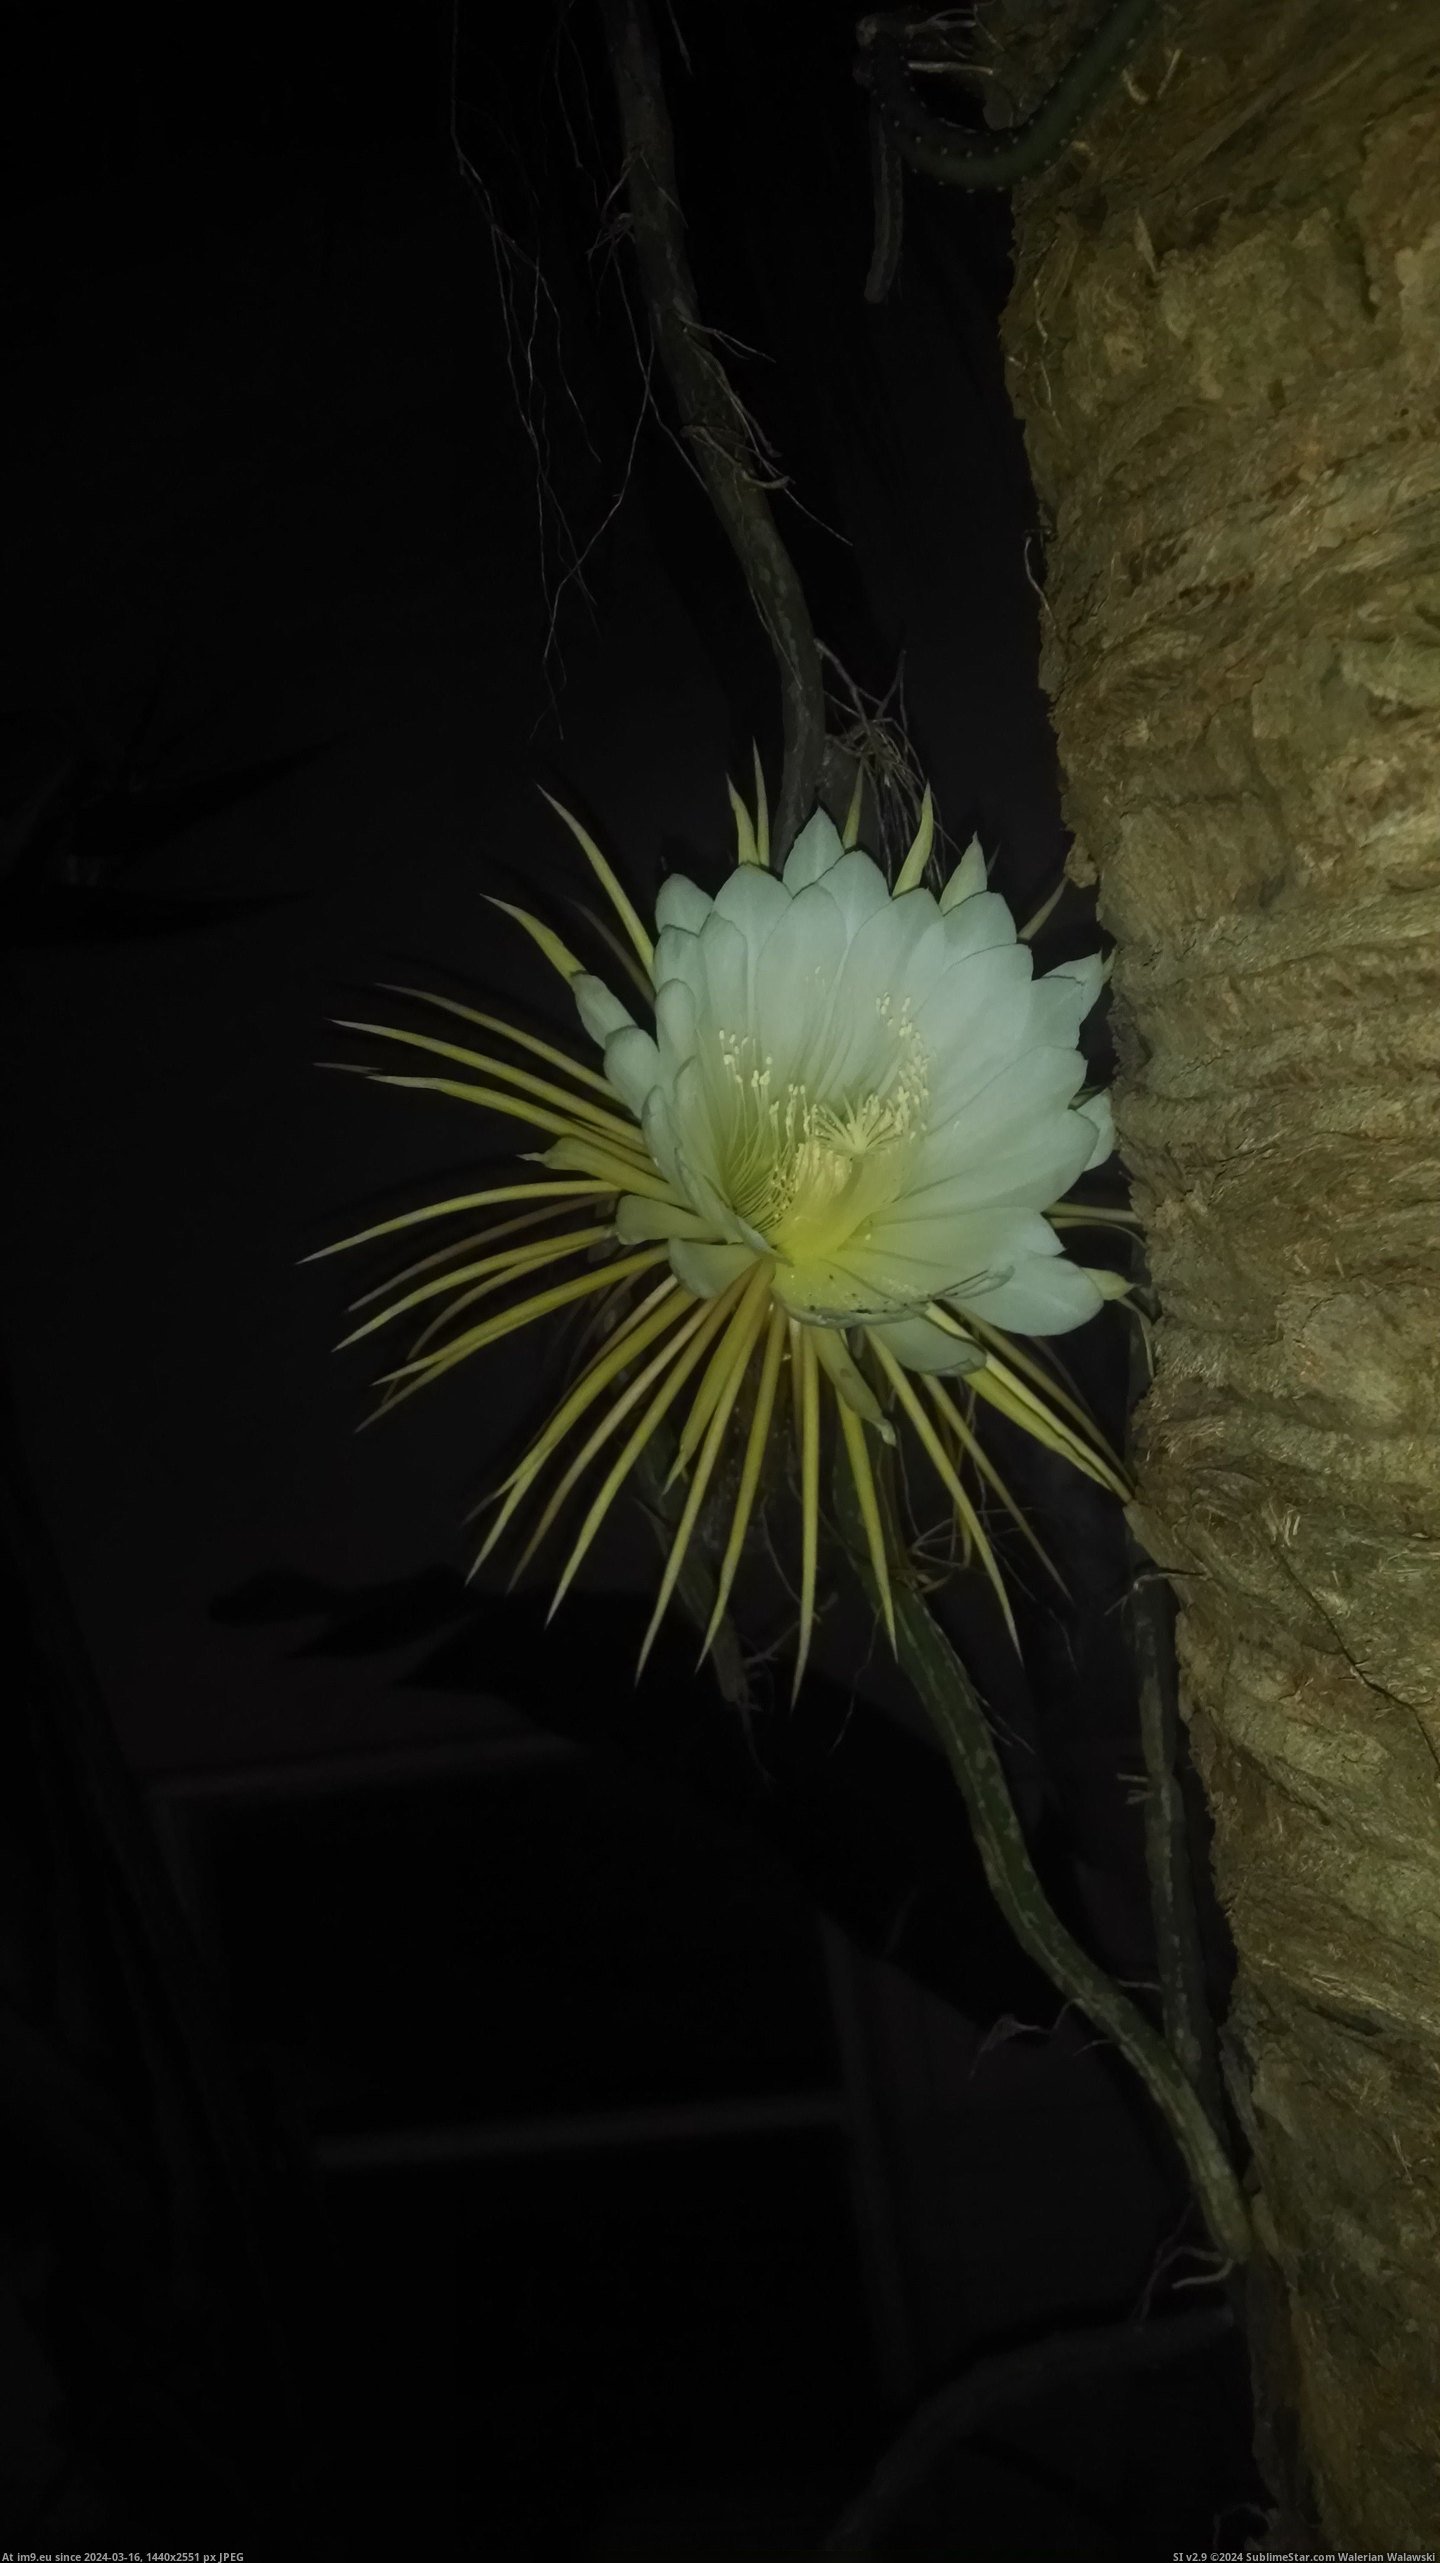 #Night #Tree #Front #Palm #Cactus #Hangs #Bloomed #Saw #Yard #Walked [Pics] I have a cactus that hangs from a palm tree in my front yard. Last night I walked outside and saw it had bloomed. Only ha Pic. (Изображение из альбом My r/PICS favs))